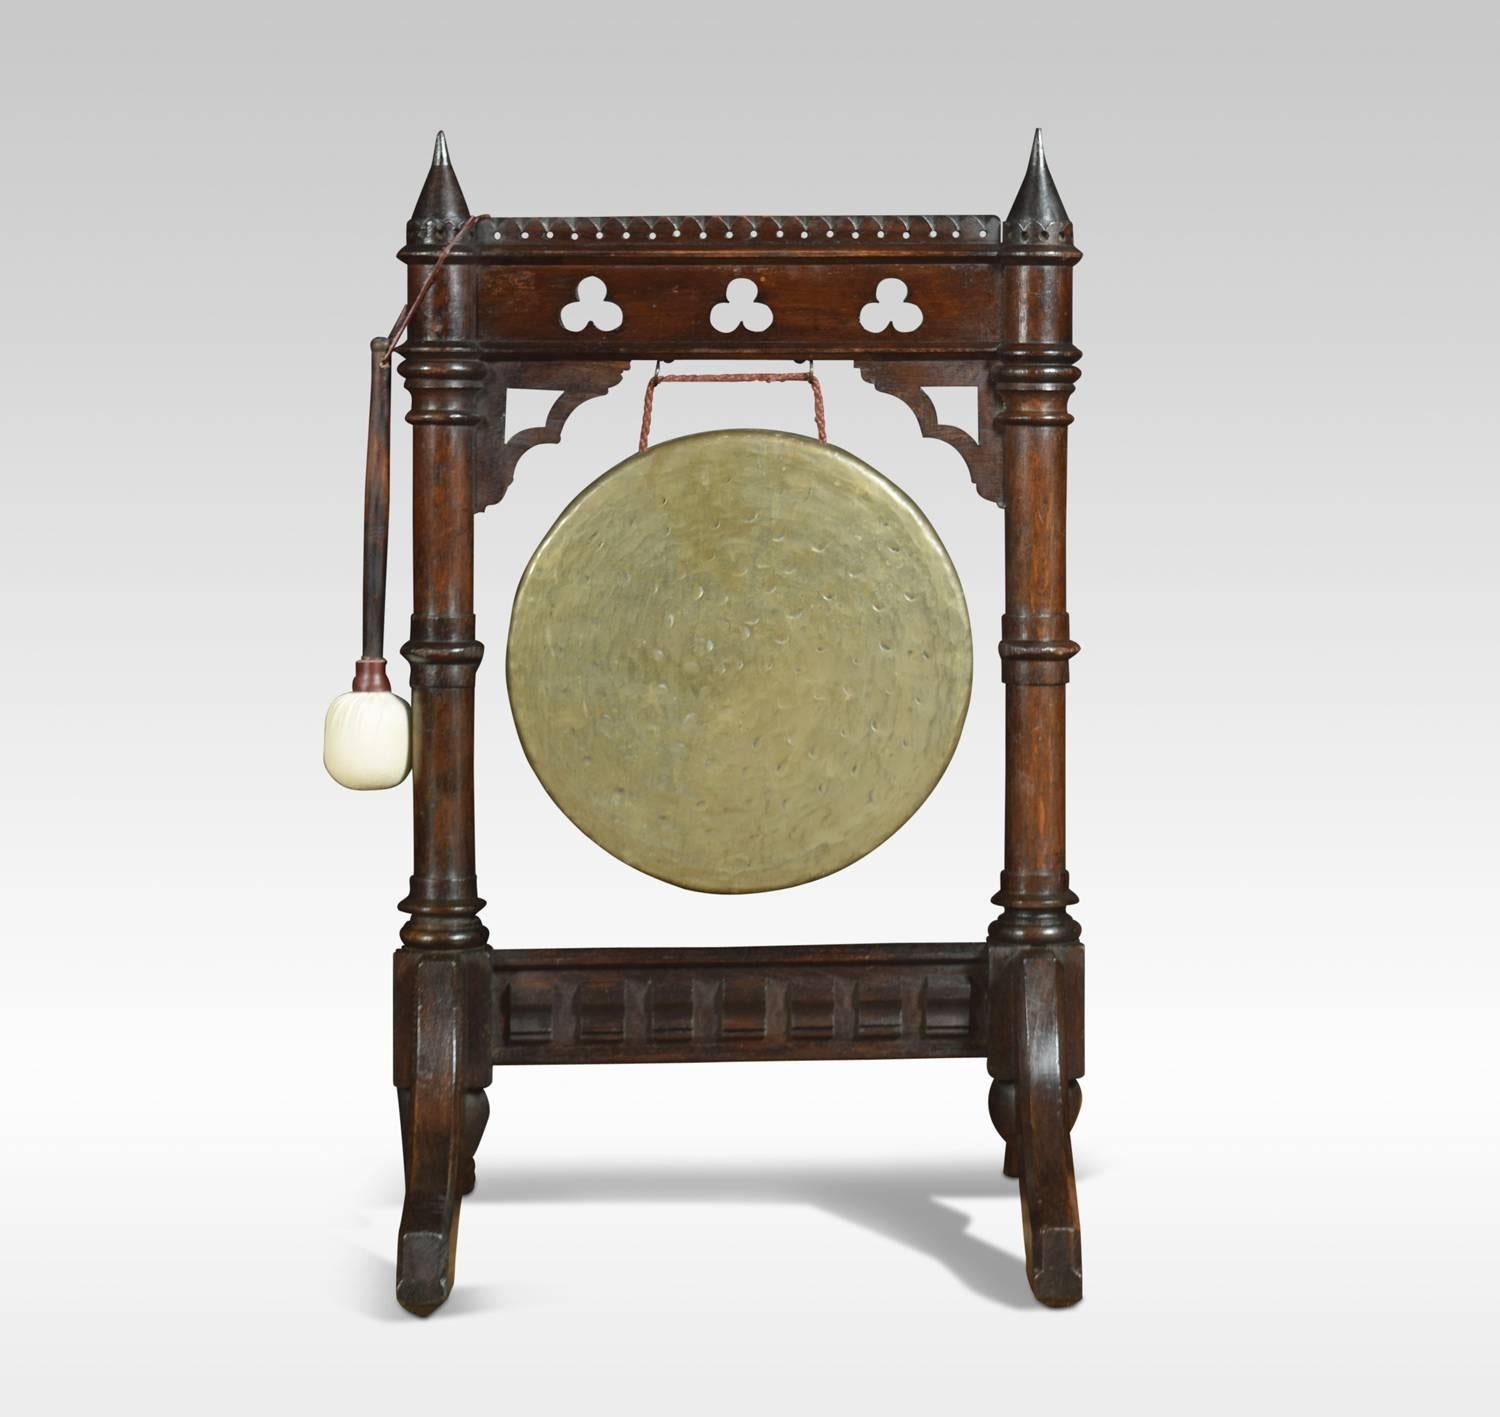 Late Victorian oak framed dinner gong and beater, the cone shaped finials above pierced carved Gothic frame with suspended brass gong to centre raised up on shaped feet
Dimensions:
Height 34 inches
Width 20.5 inches
Depth 19 inches
Diameter of